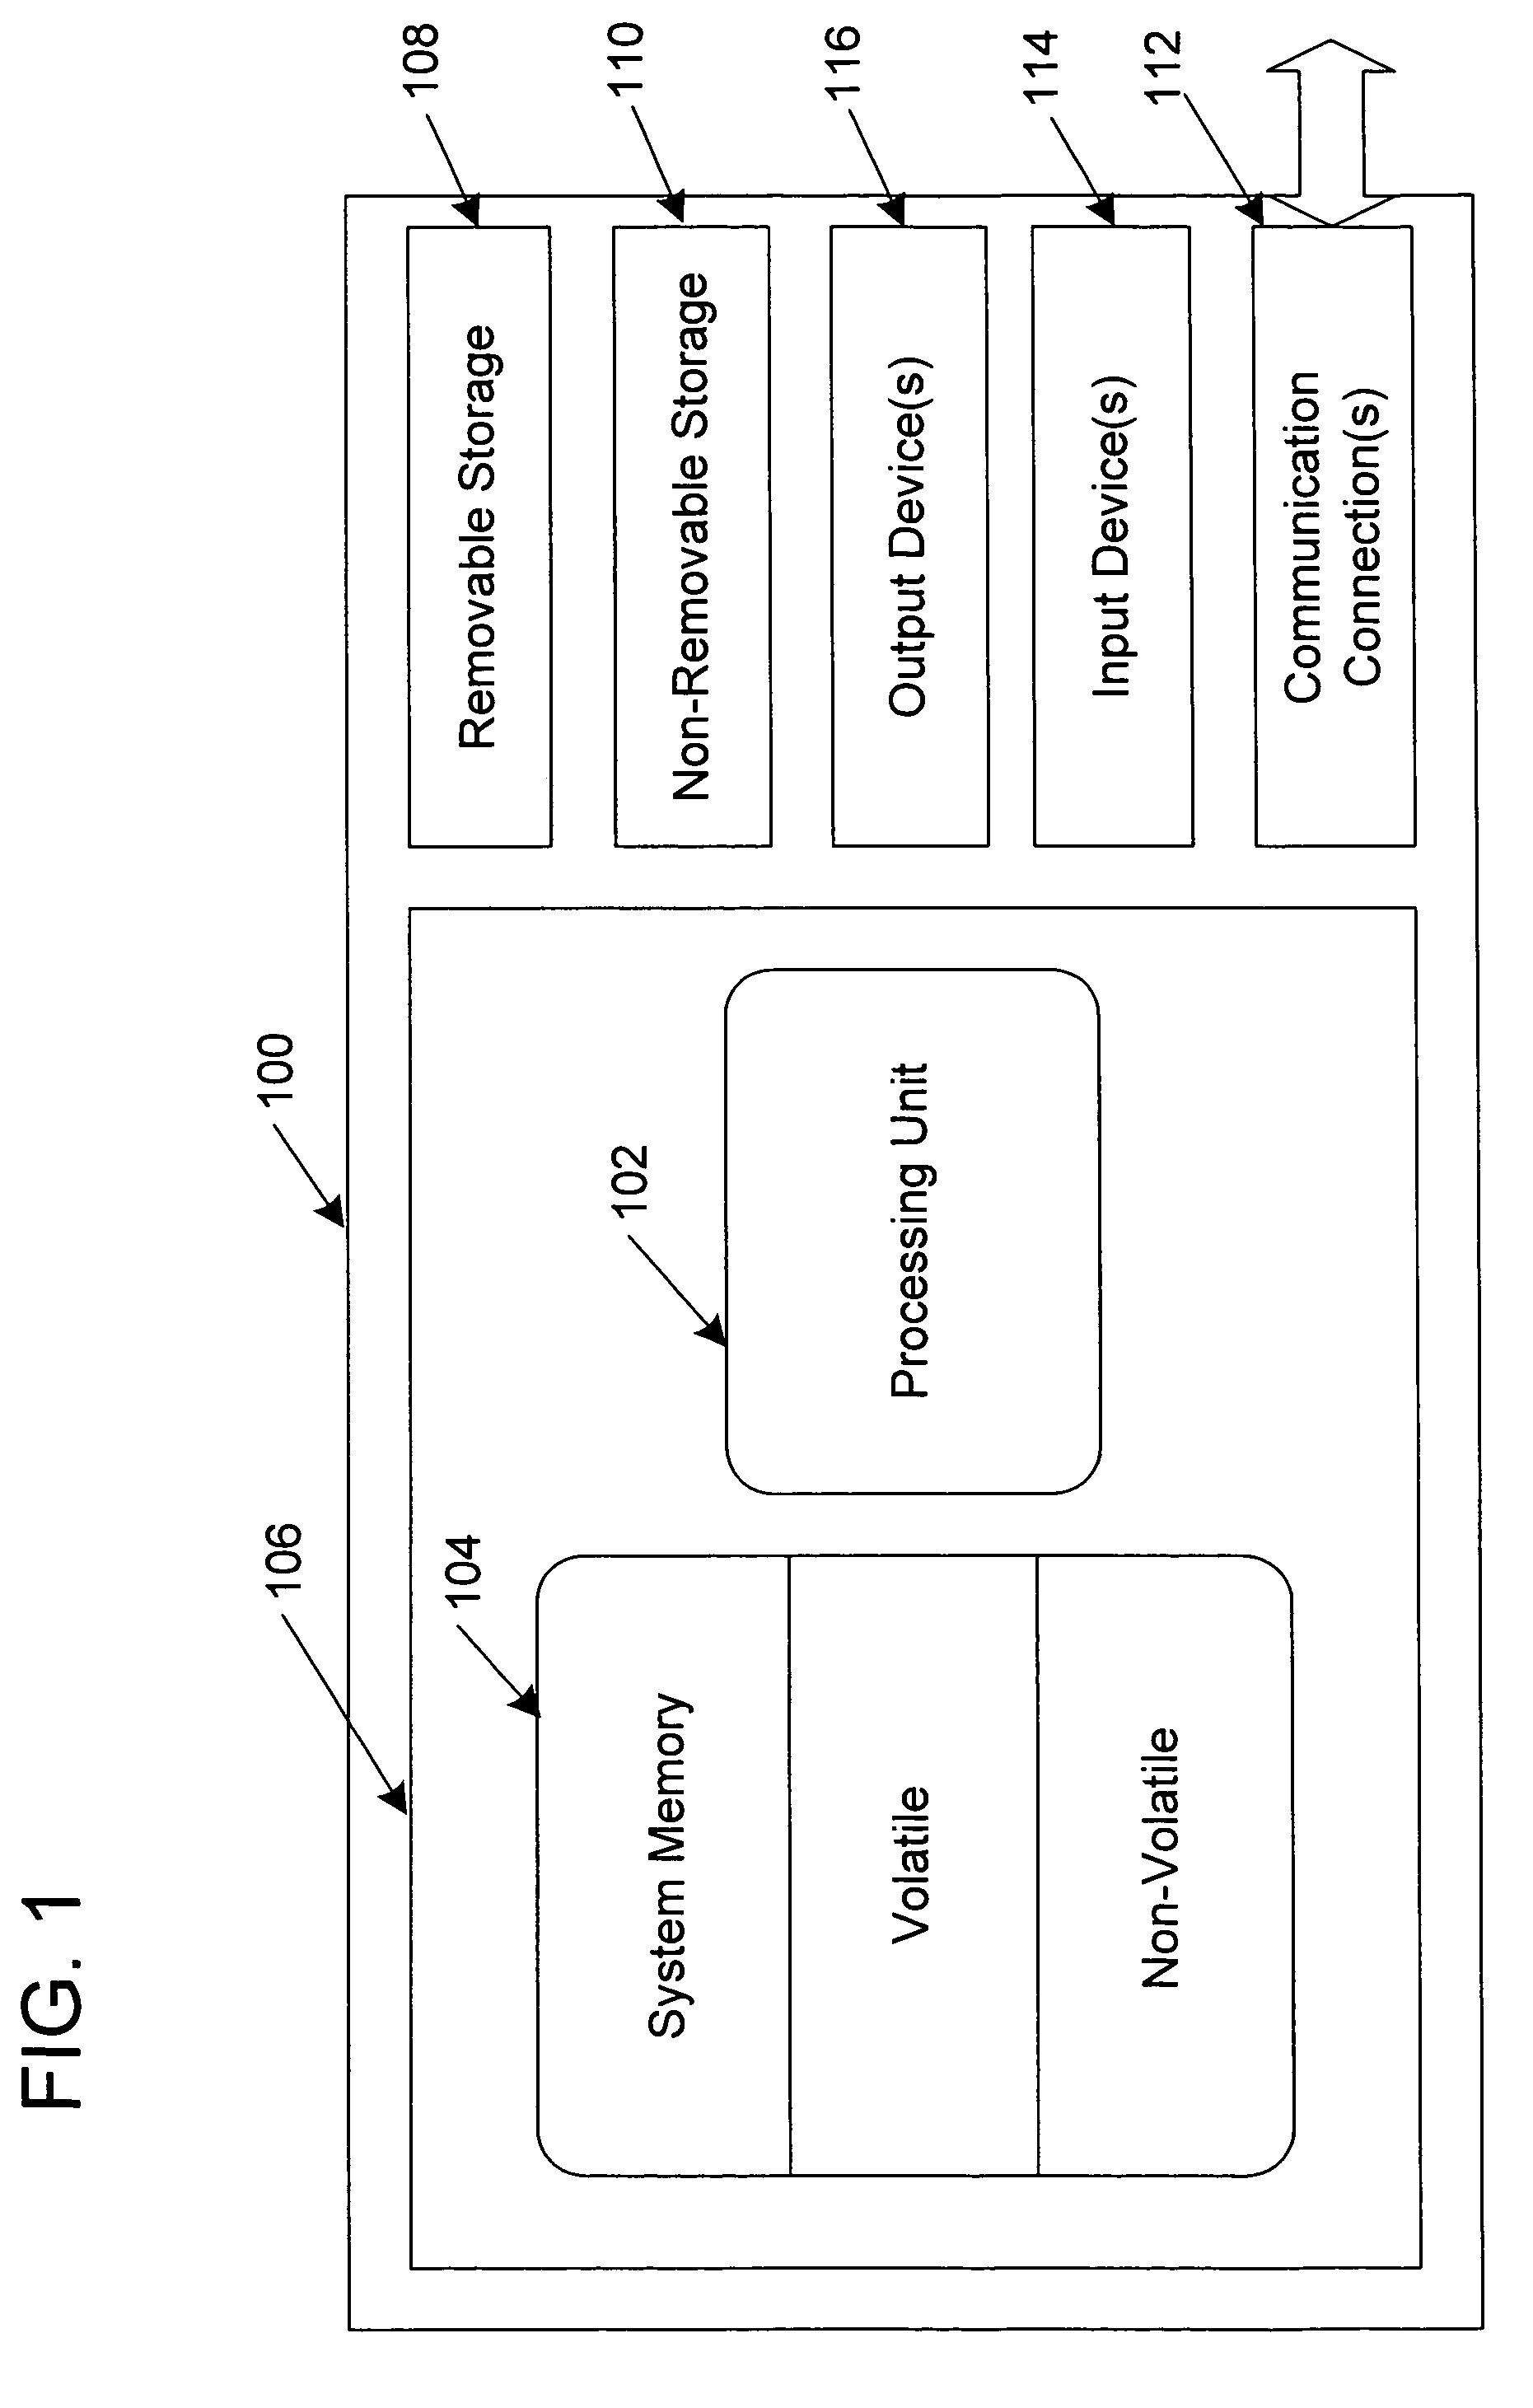 Network experience rating system and method